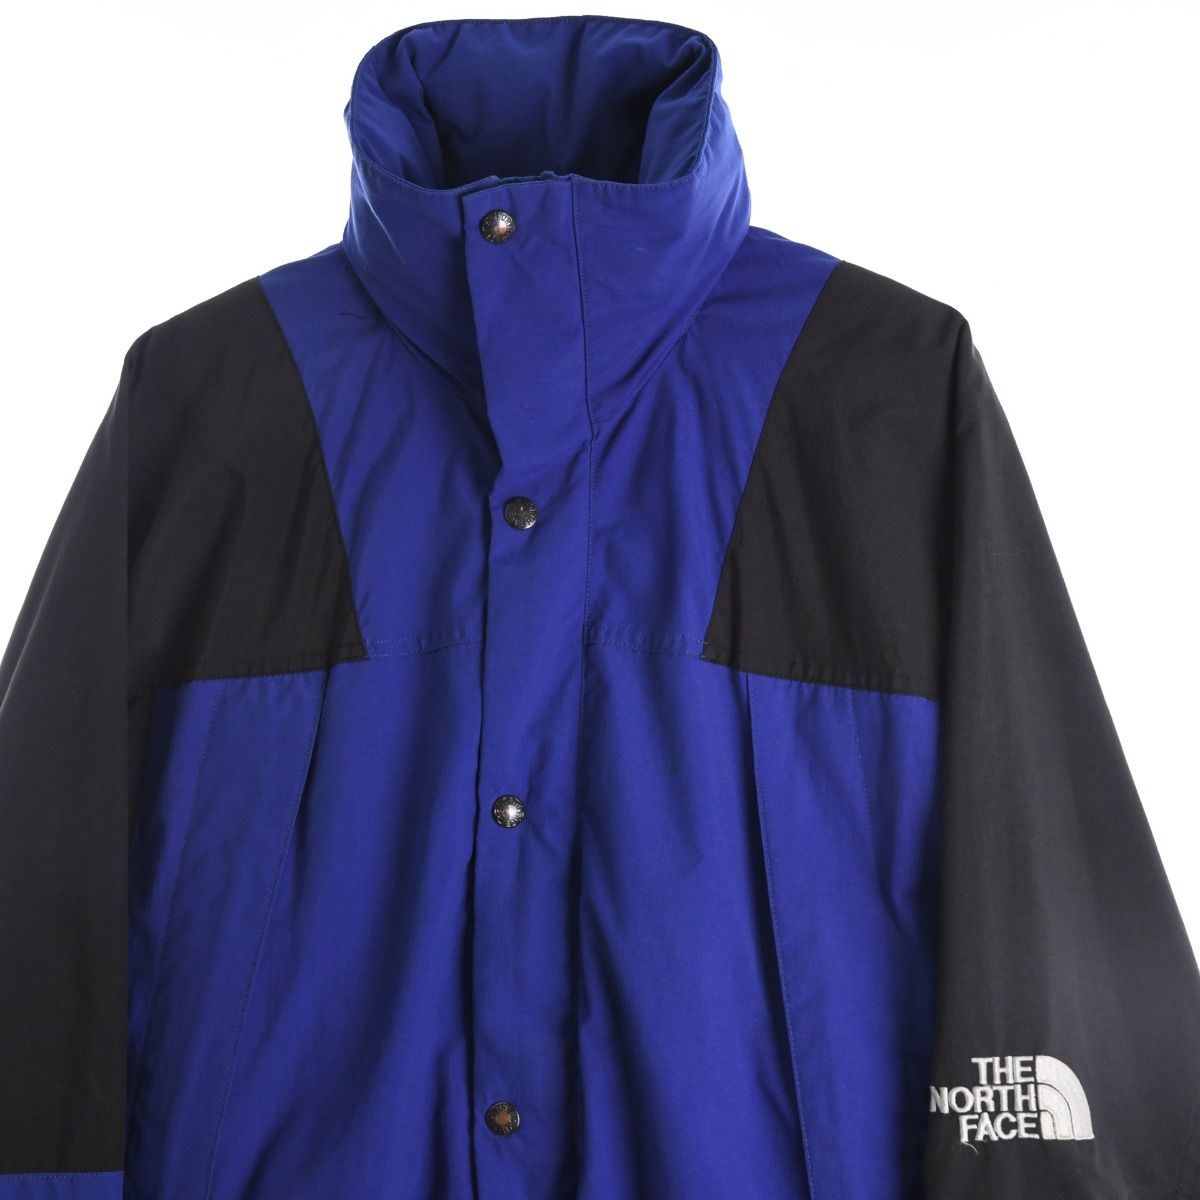 The North Face 1990s Gore Activent Mountain Jacket